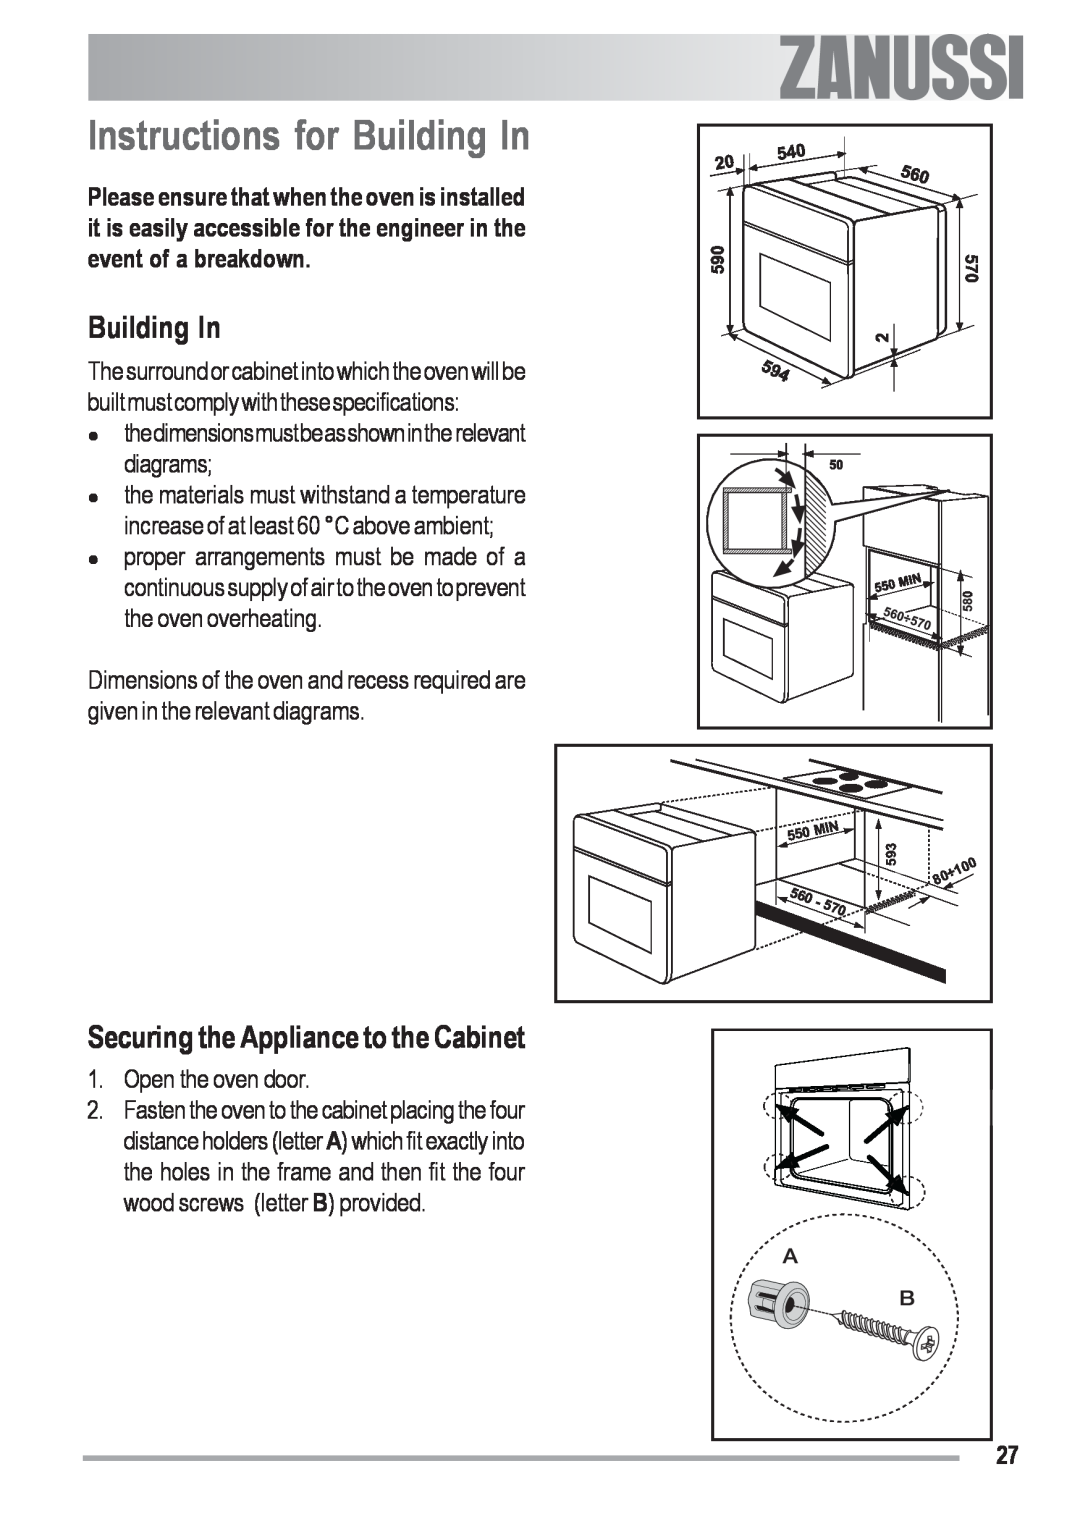 Zanussi ZOB 330 manual Instructions for Building In, Securing the Appliance to the Cabinet 